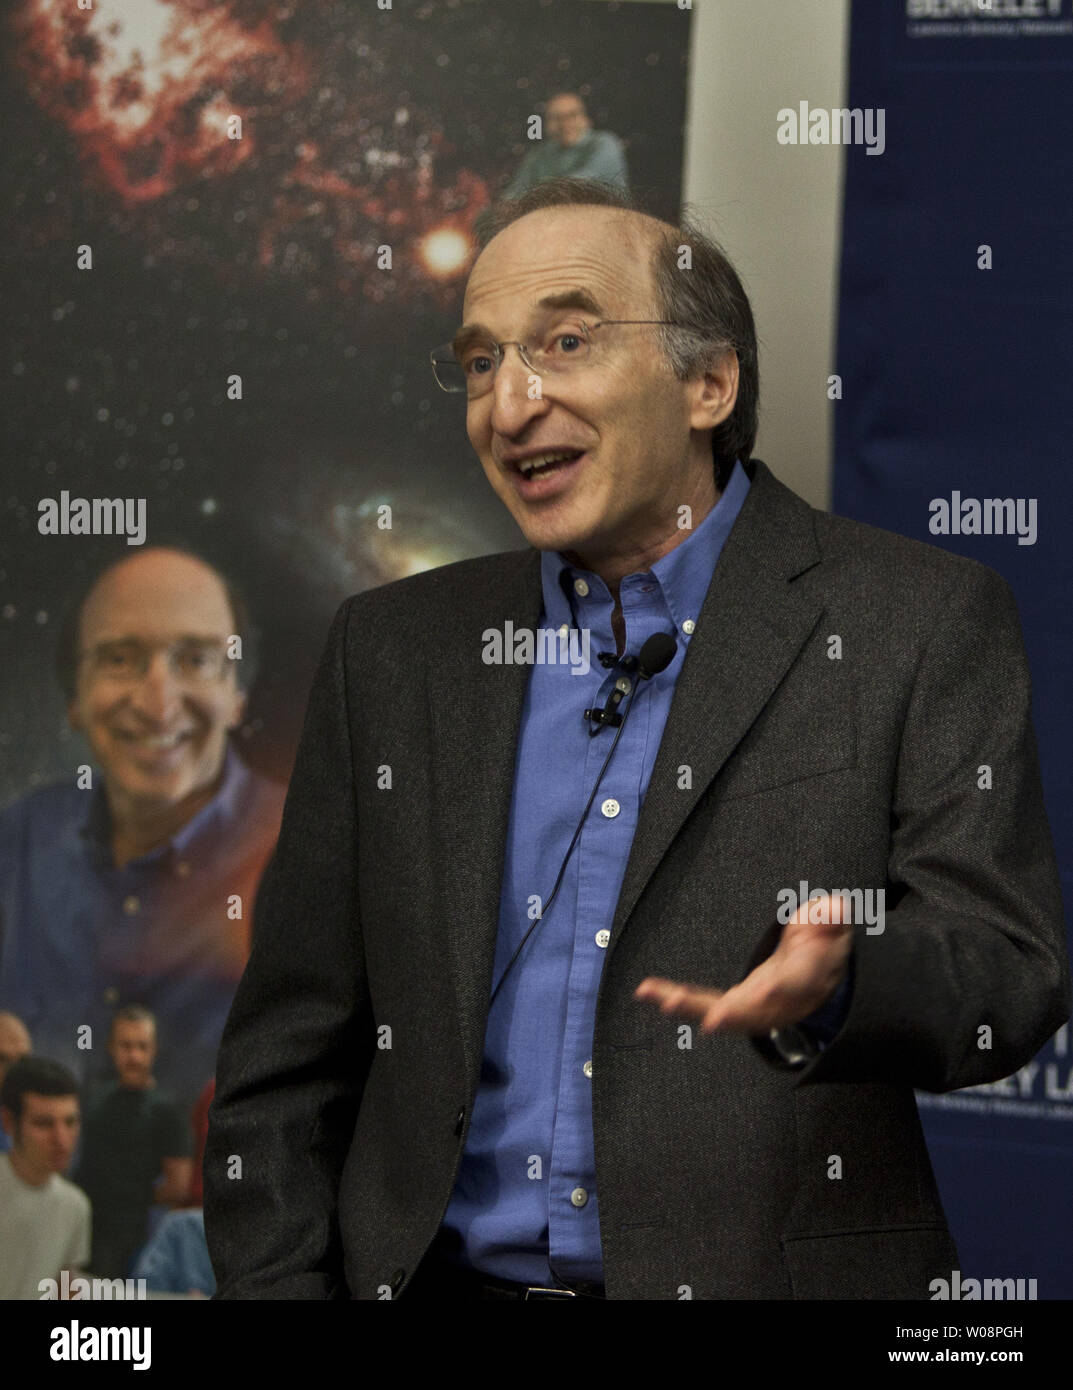 Saul Perlmutter, winner of the 2011 Nobel Prize in physics, speaks at a press conference at the University of California, in Berkeley, California on October 4, 2011. Perlmutter was one of three U.S.-born scientists who won the prize for a study of exploding stars that showed the expansion of the universe is accelerating.  UPI/Terry Schmitt Stock Photo